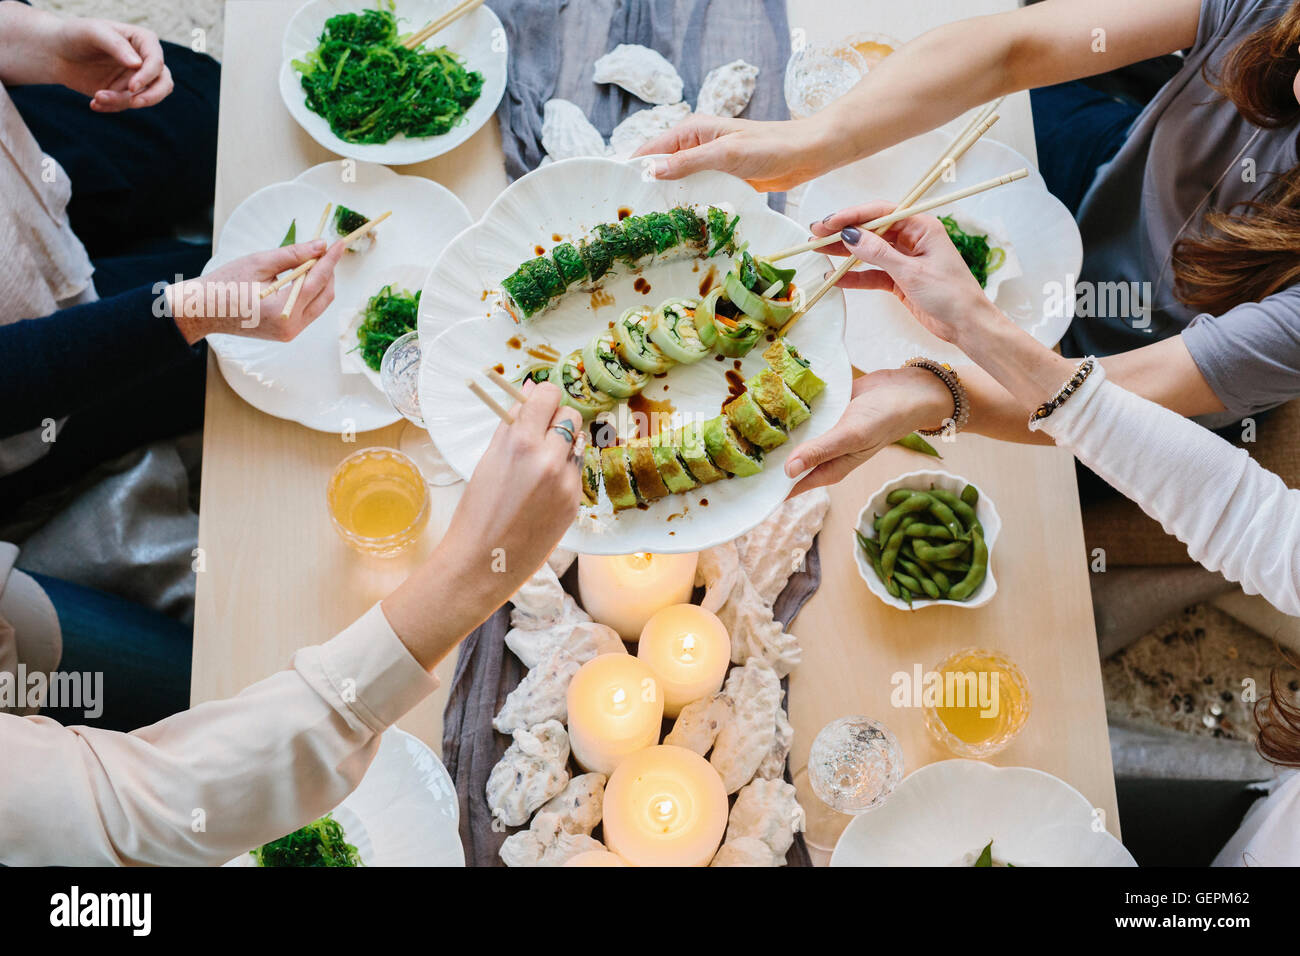 Overhead view of four people sharing a meal, plates of sushi and a table setting for a celebration meal. Stock Photo